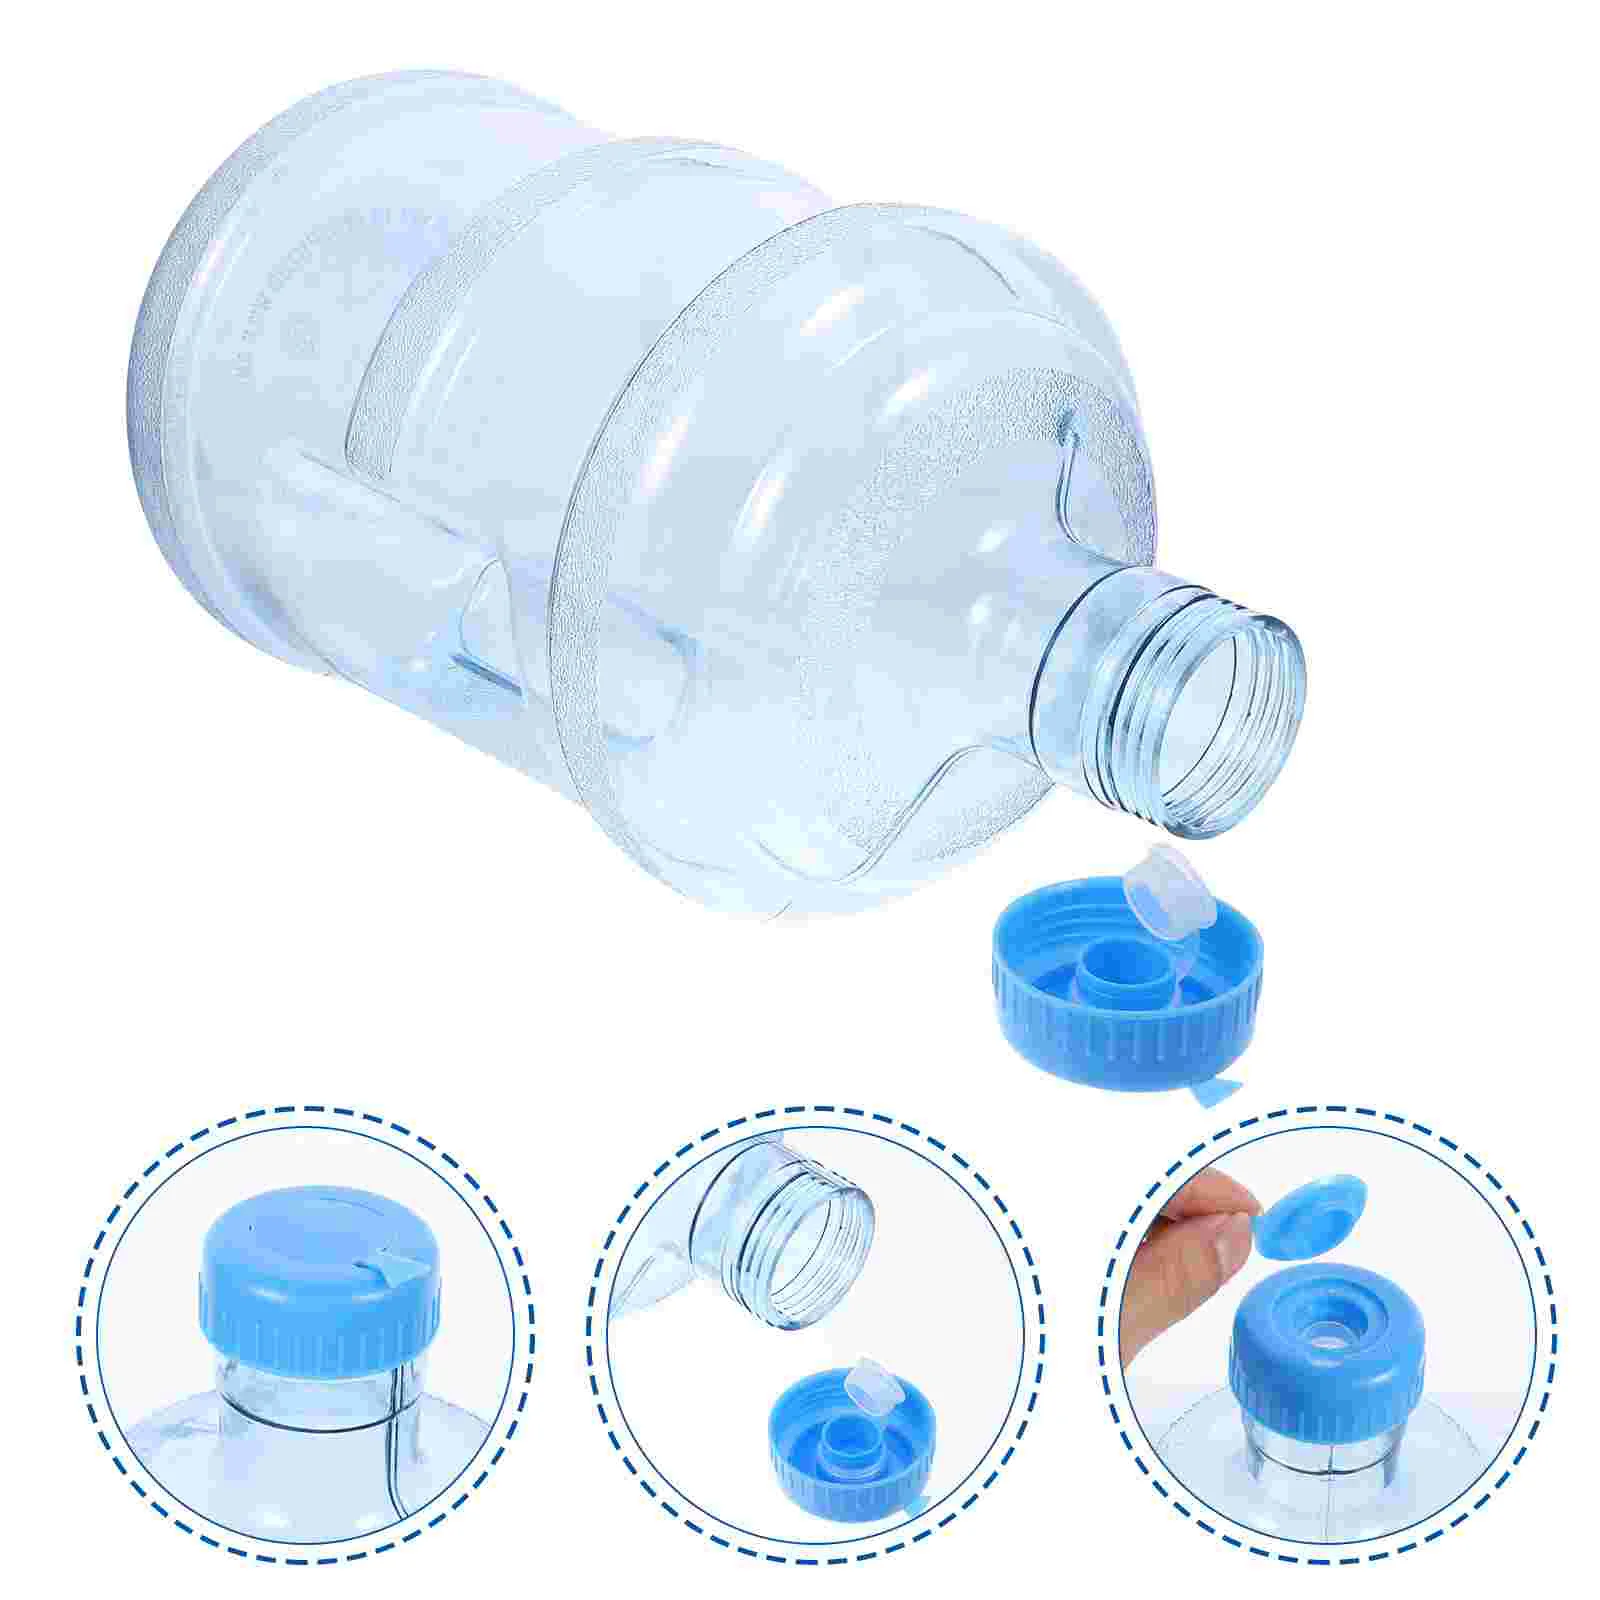 

Water Bottle Jug Storage Gallon Mineral Bucket Camping Large Container Tub Portable Handle Reusable Bottles Carrier Sports Liter